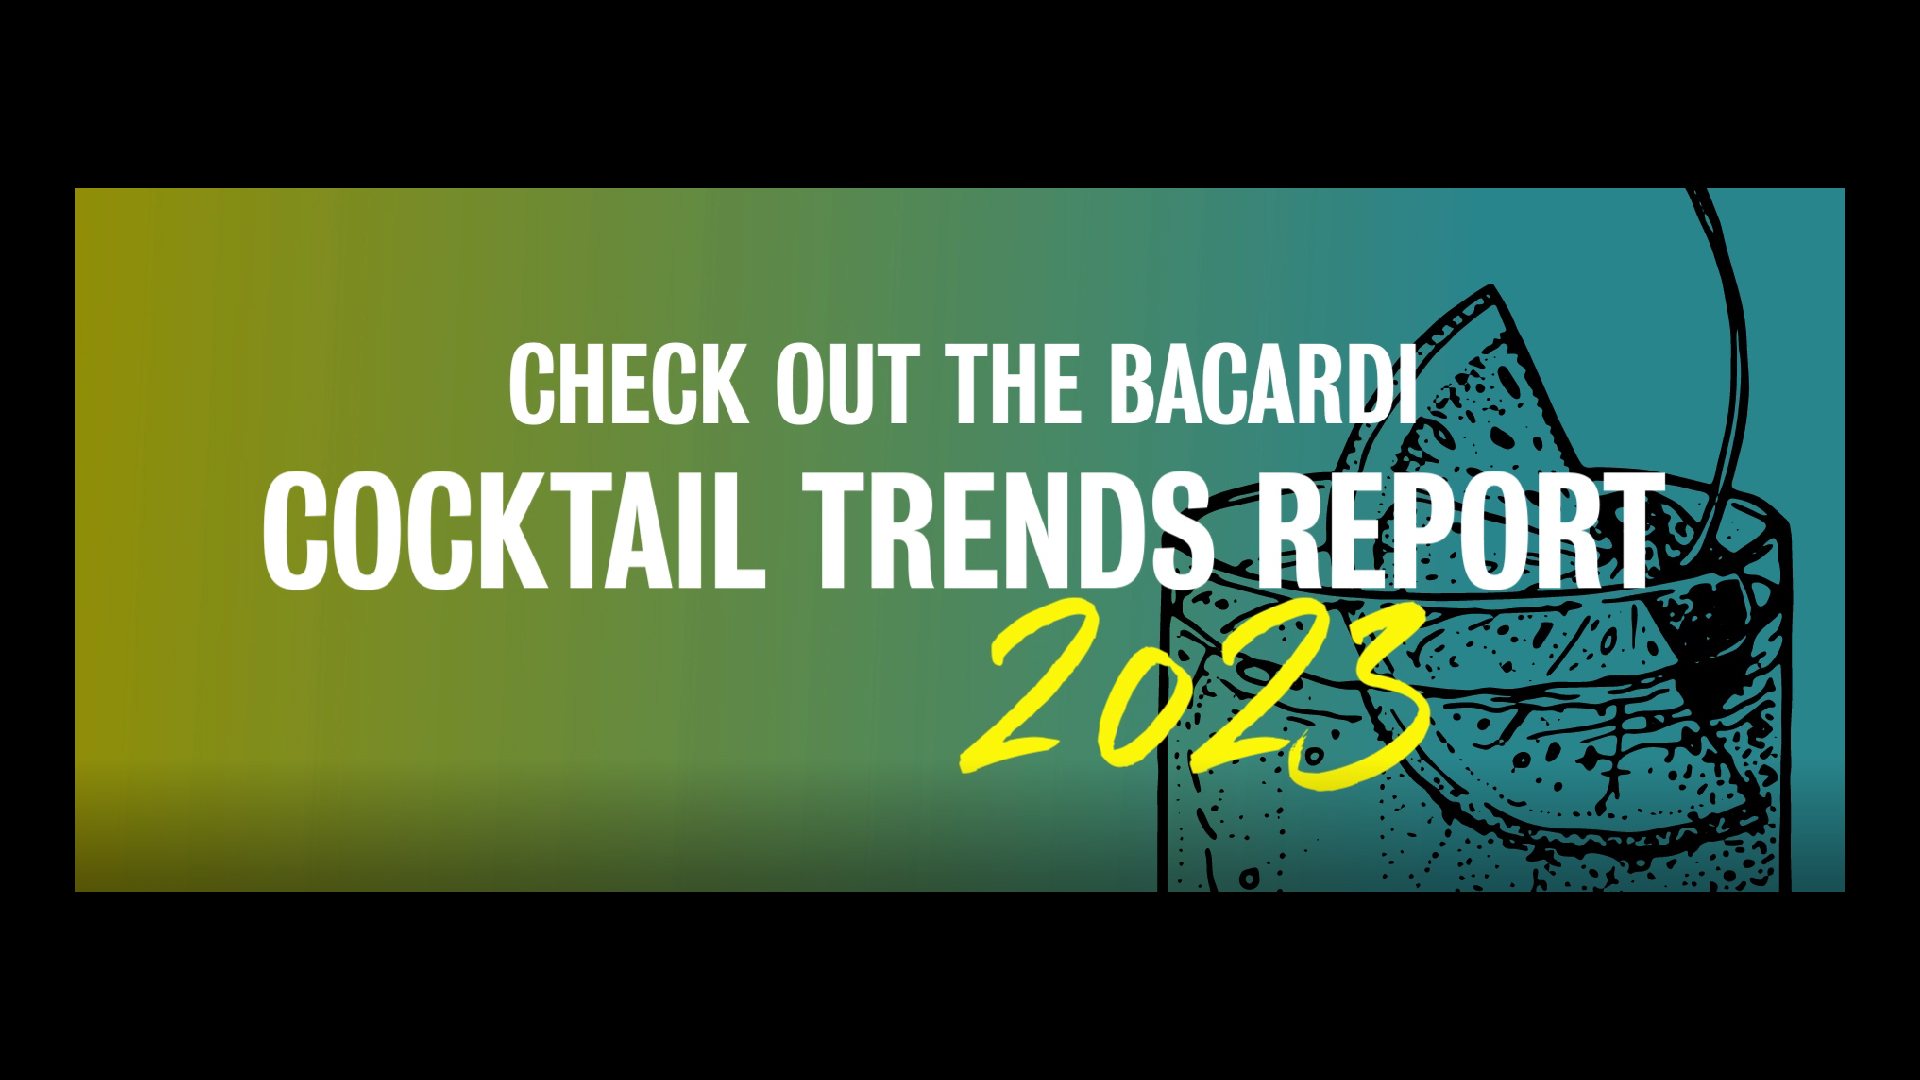 The latest Bacardi Cocktail Trends Report spotlights the growing interest in exciting, bold flavors, digital experiences, and new cocktail occasions, all while keeping a mindful approach.